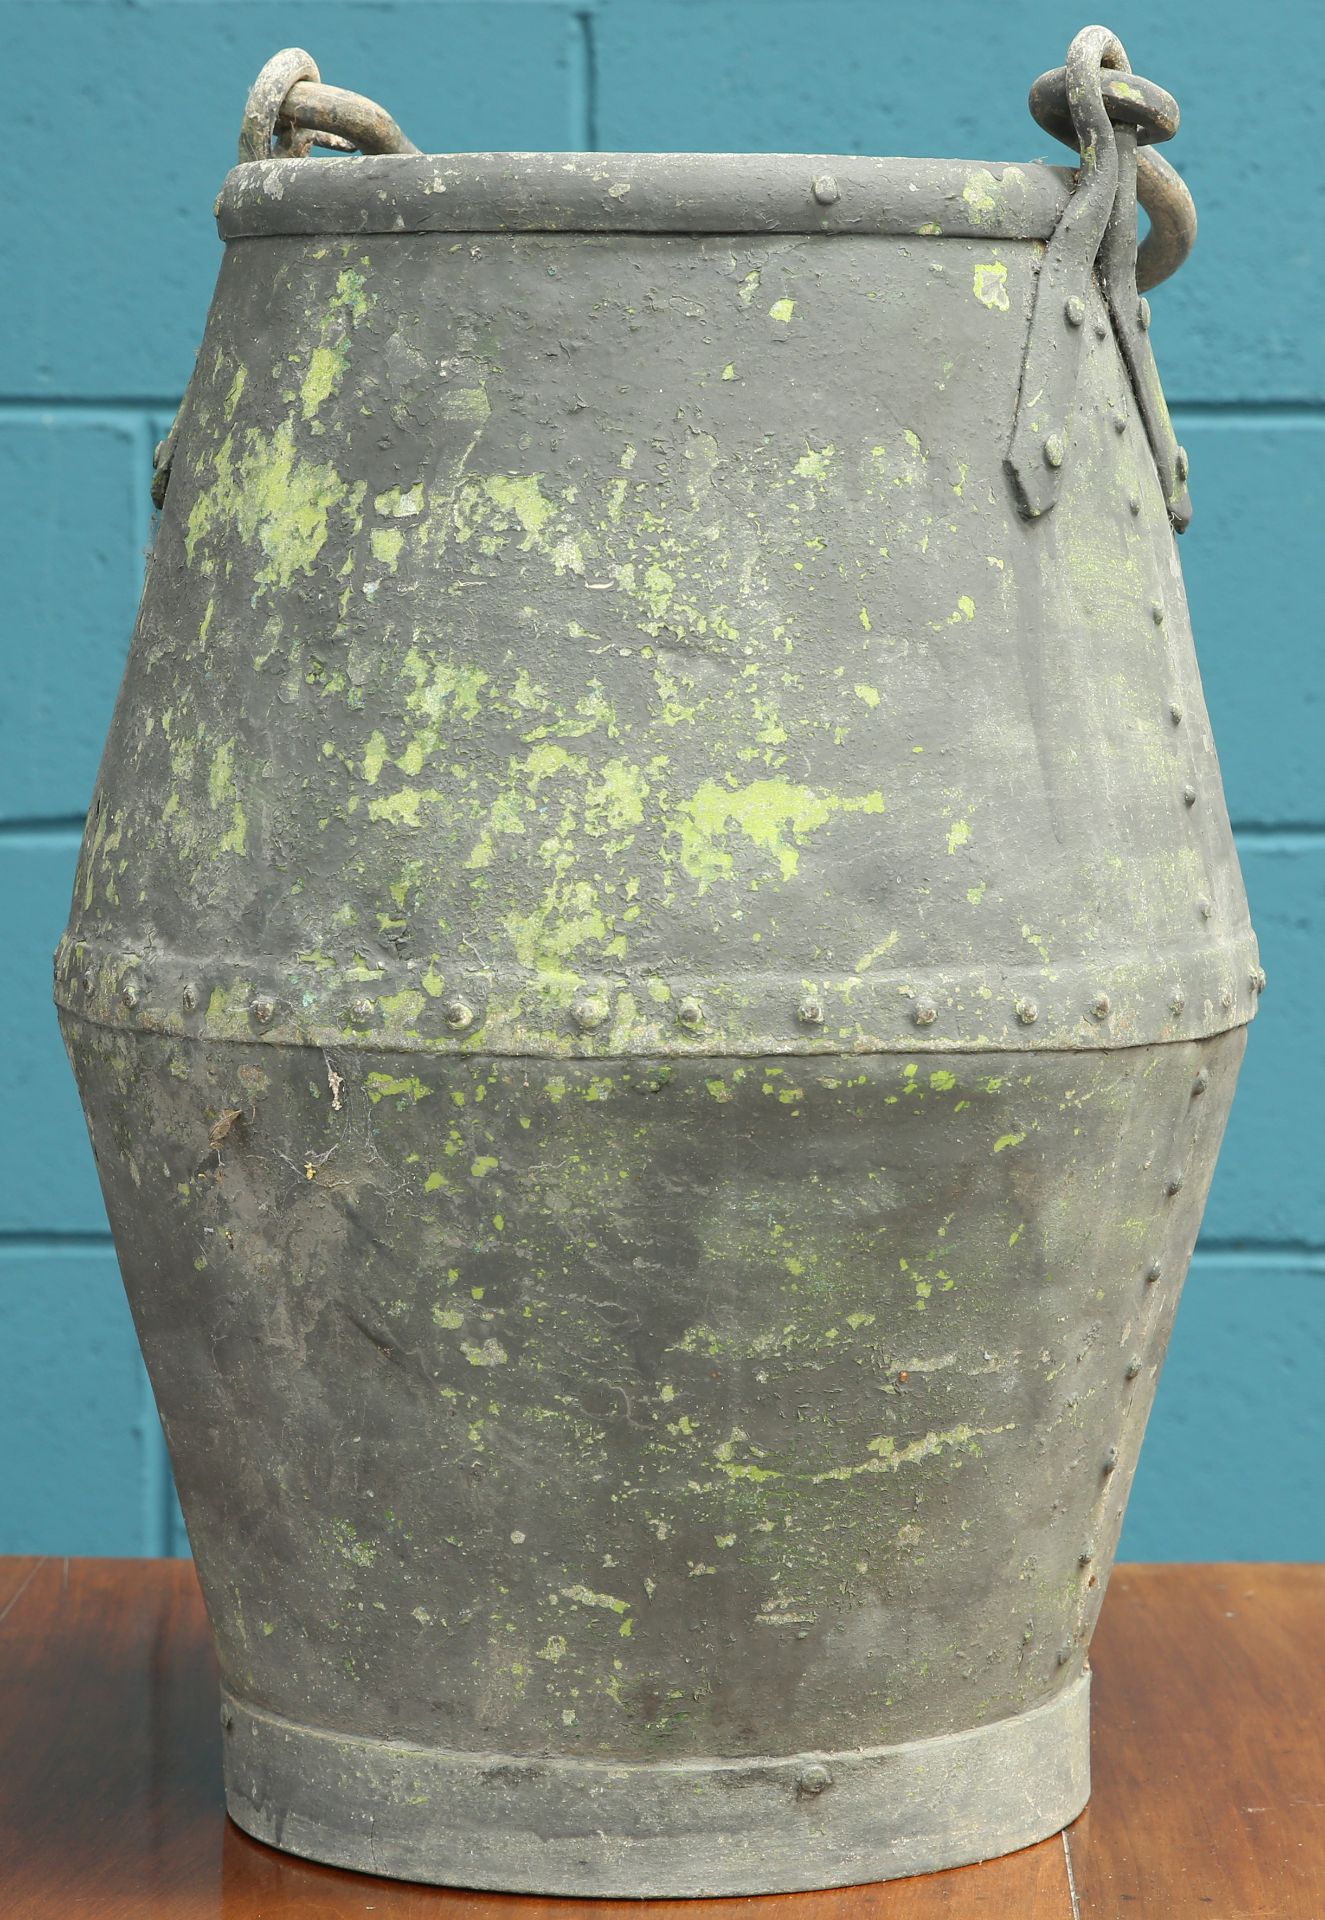 A LARGE METAL PAIL WITH SWING HANDLE - Image 2 of 2